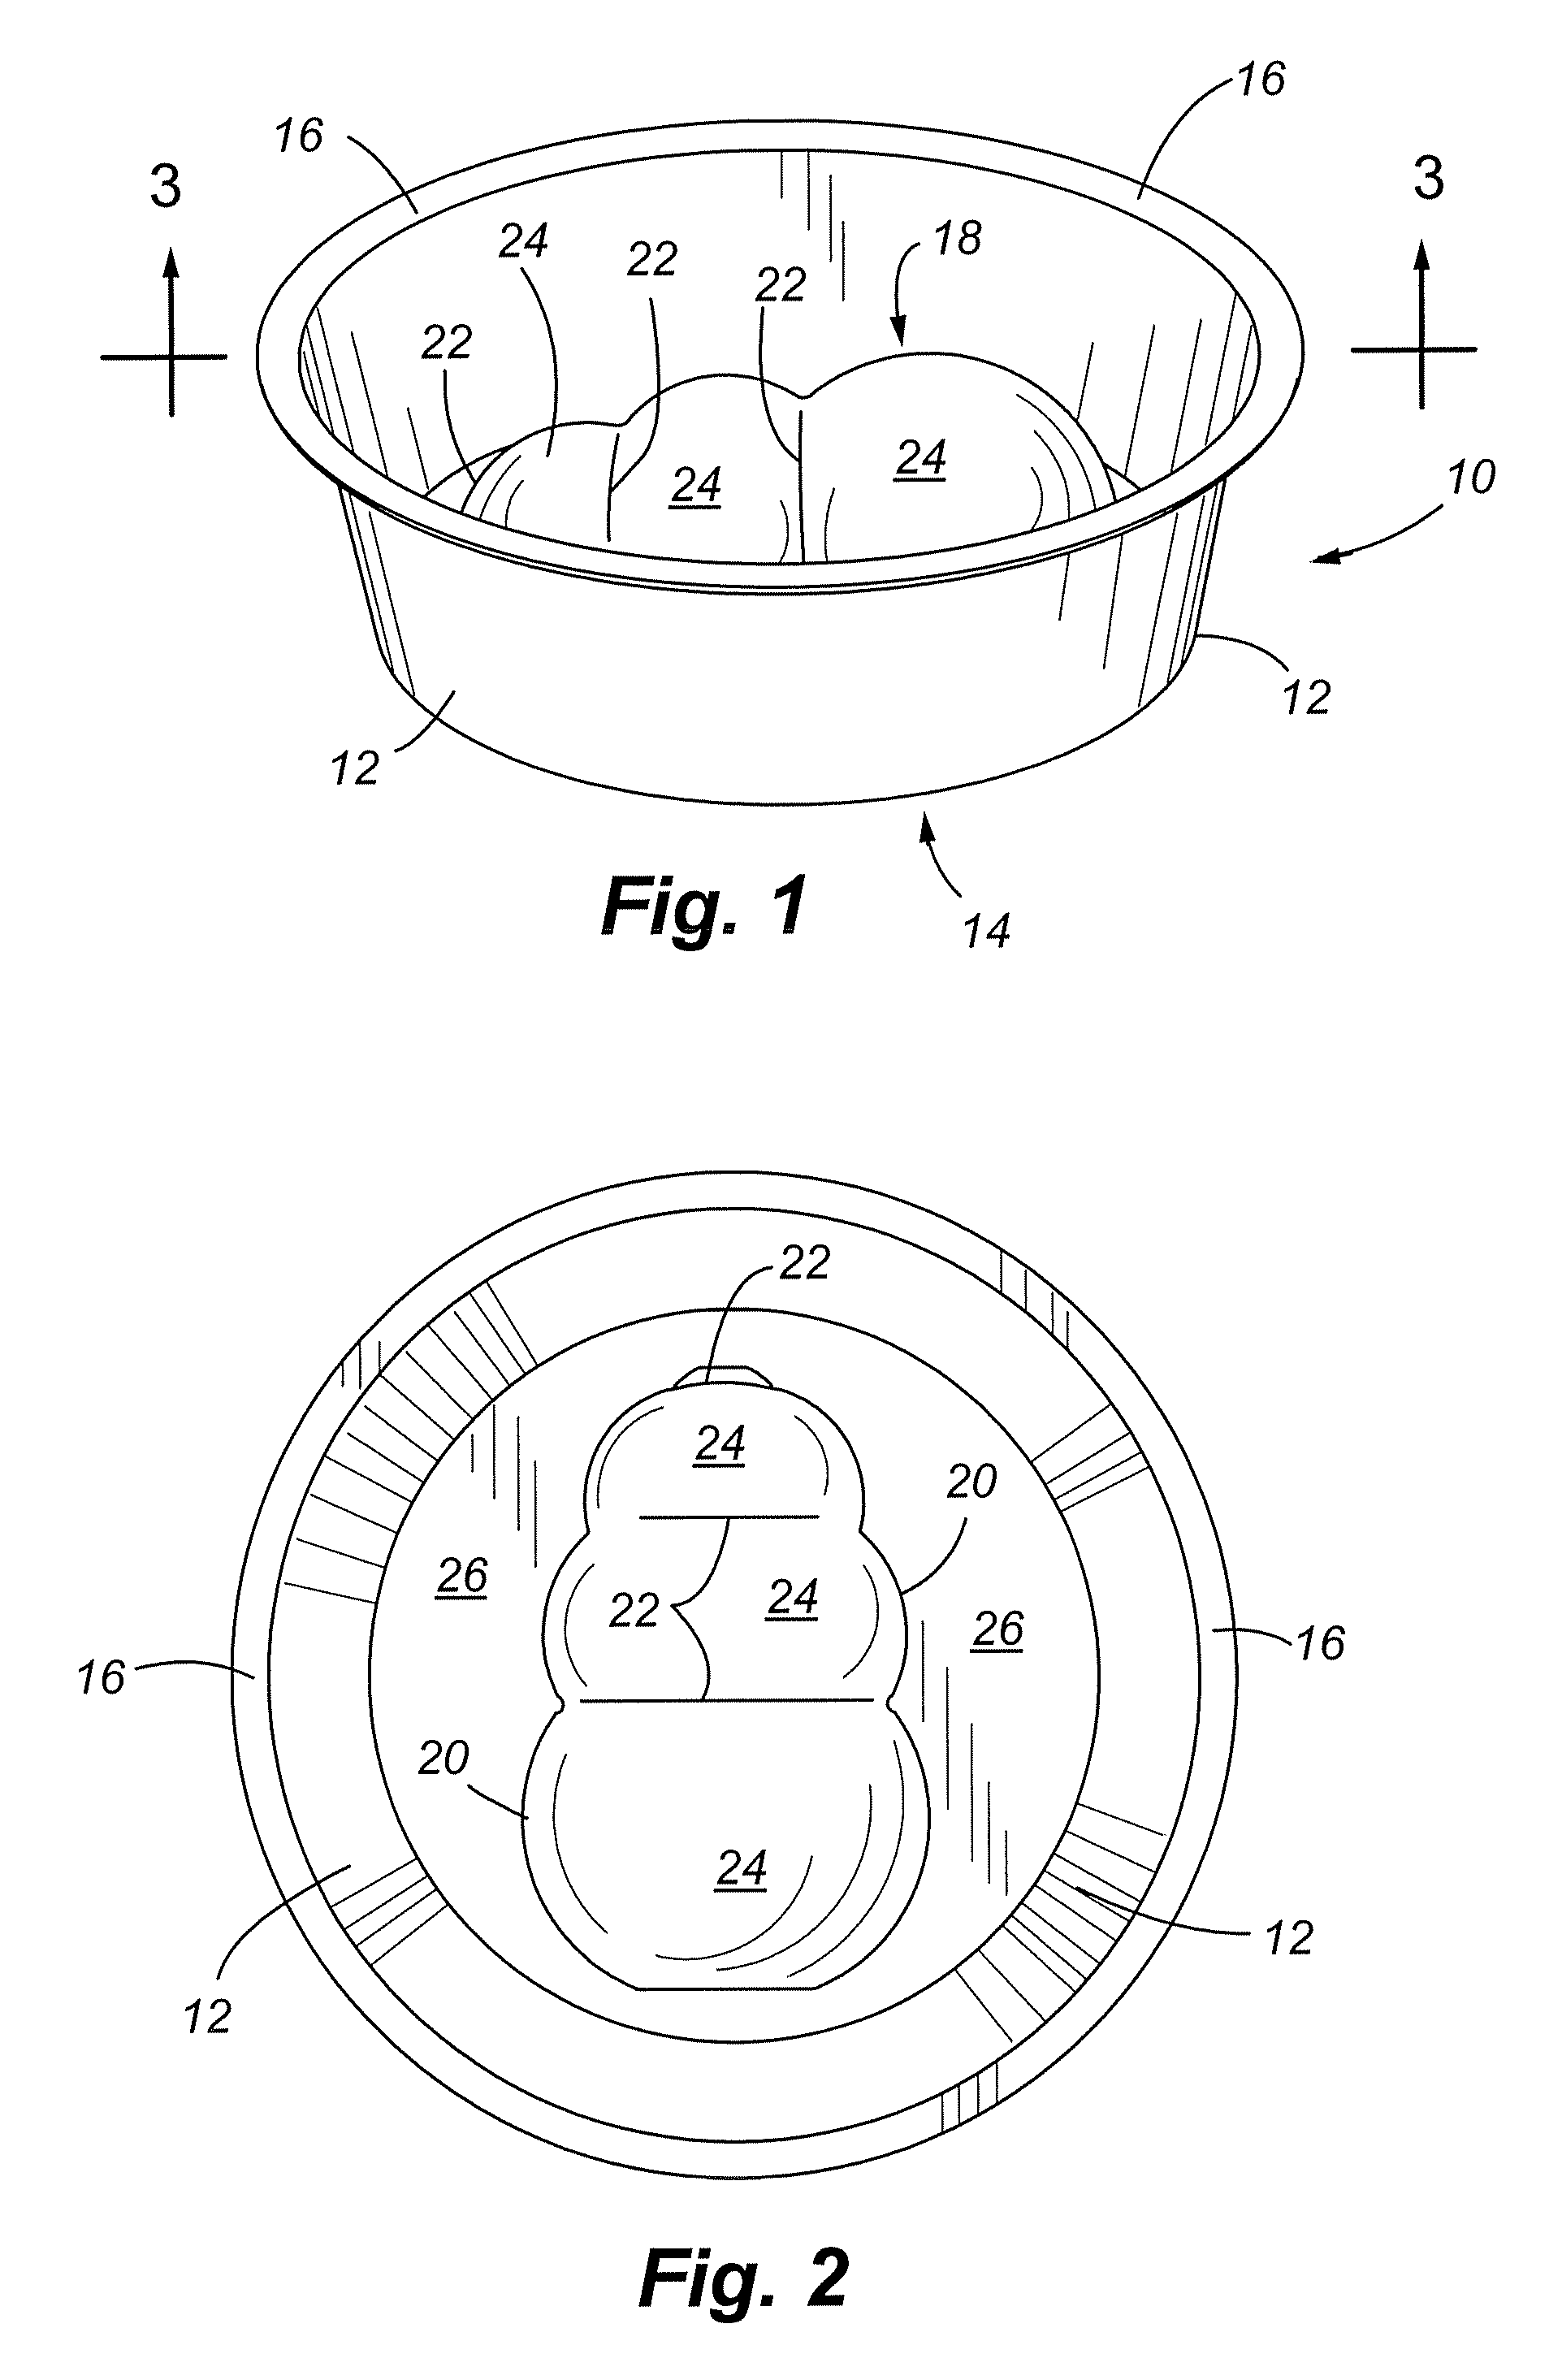 Pet food bowl with integral protrusion for preventing aspiration of food